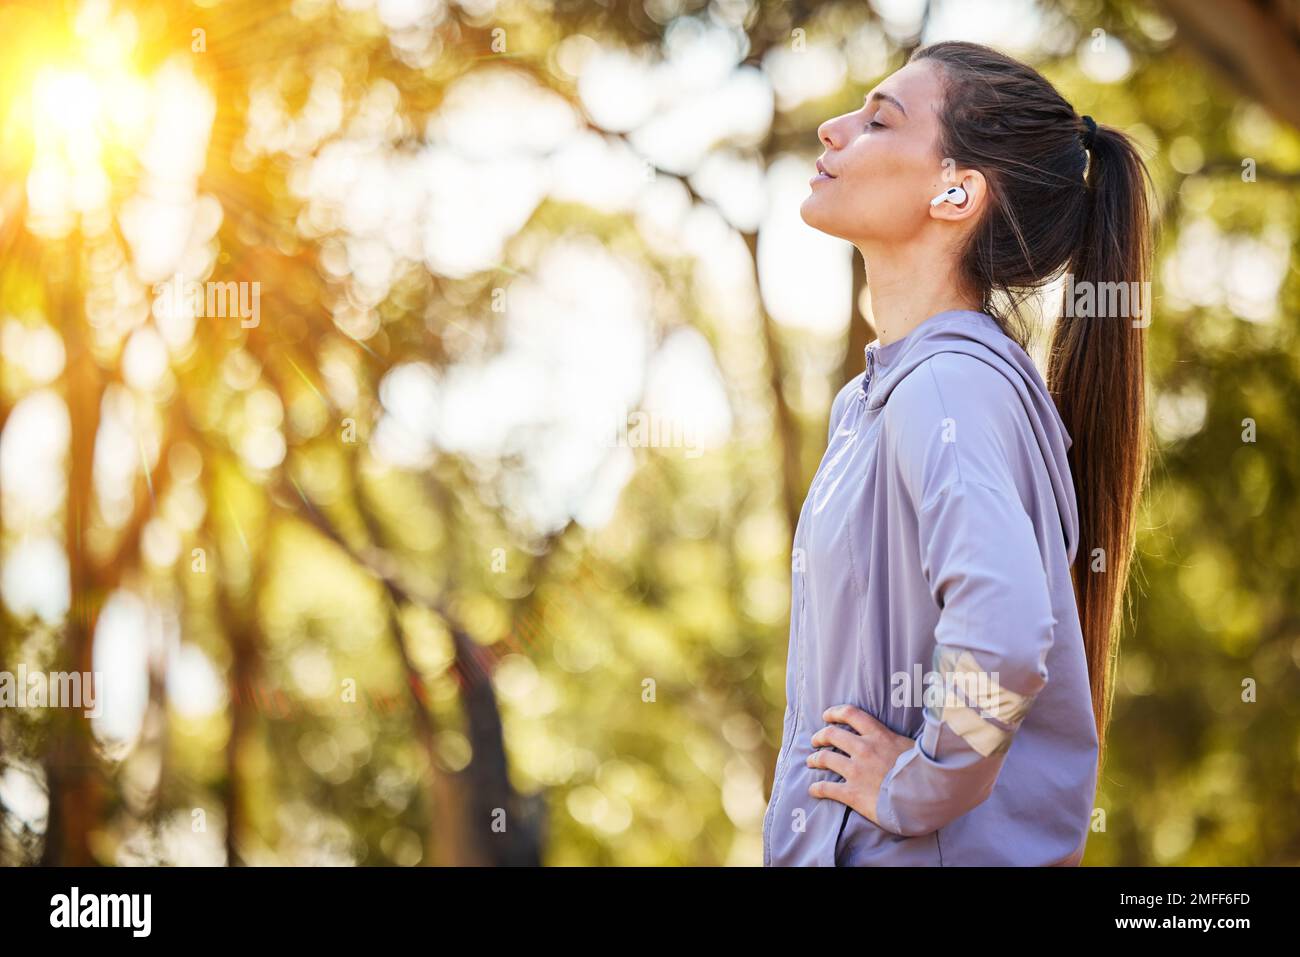 Calm, music and fitness person in nature for mental health, wellness and breathing, forest trees and fresh air. Mockup, sports and athlete woman Stock Photo